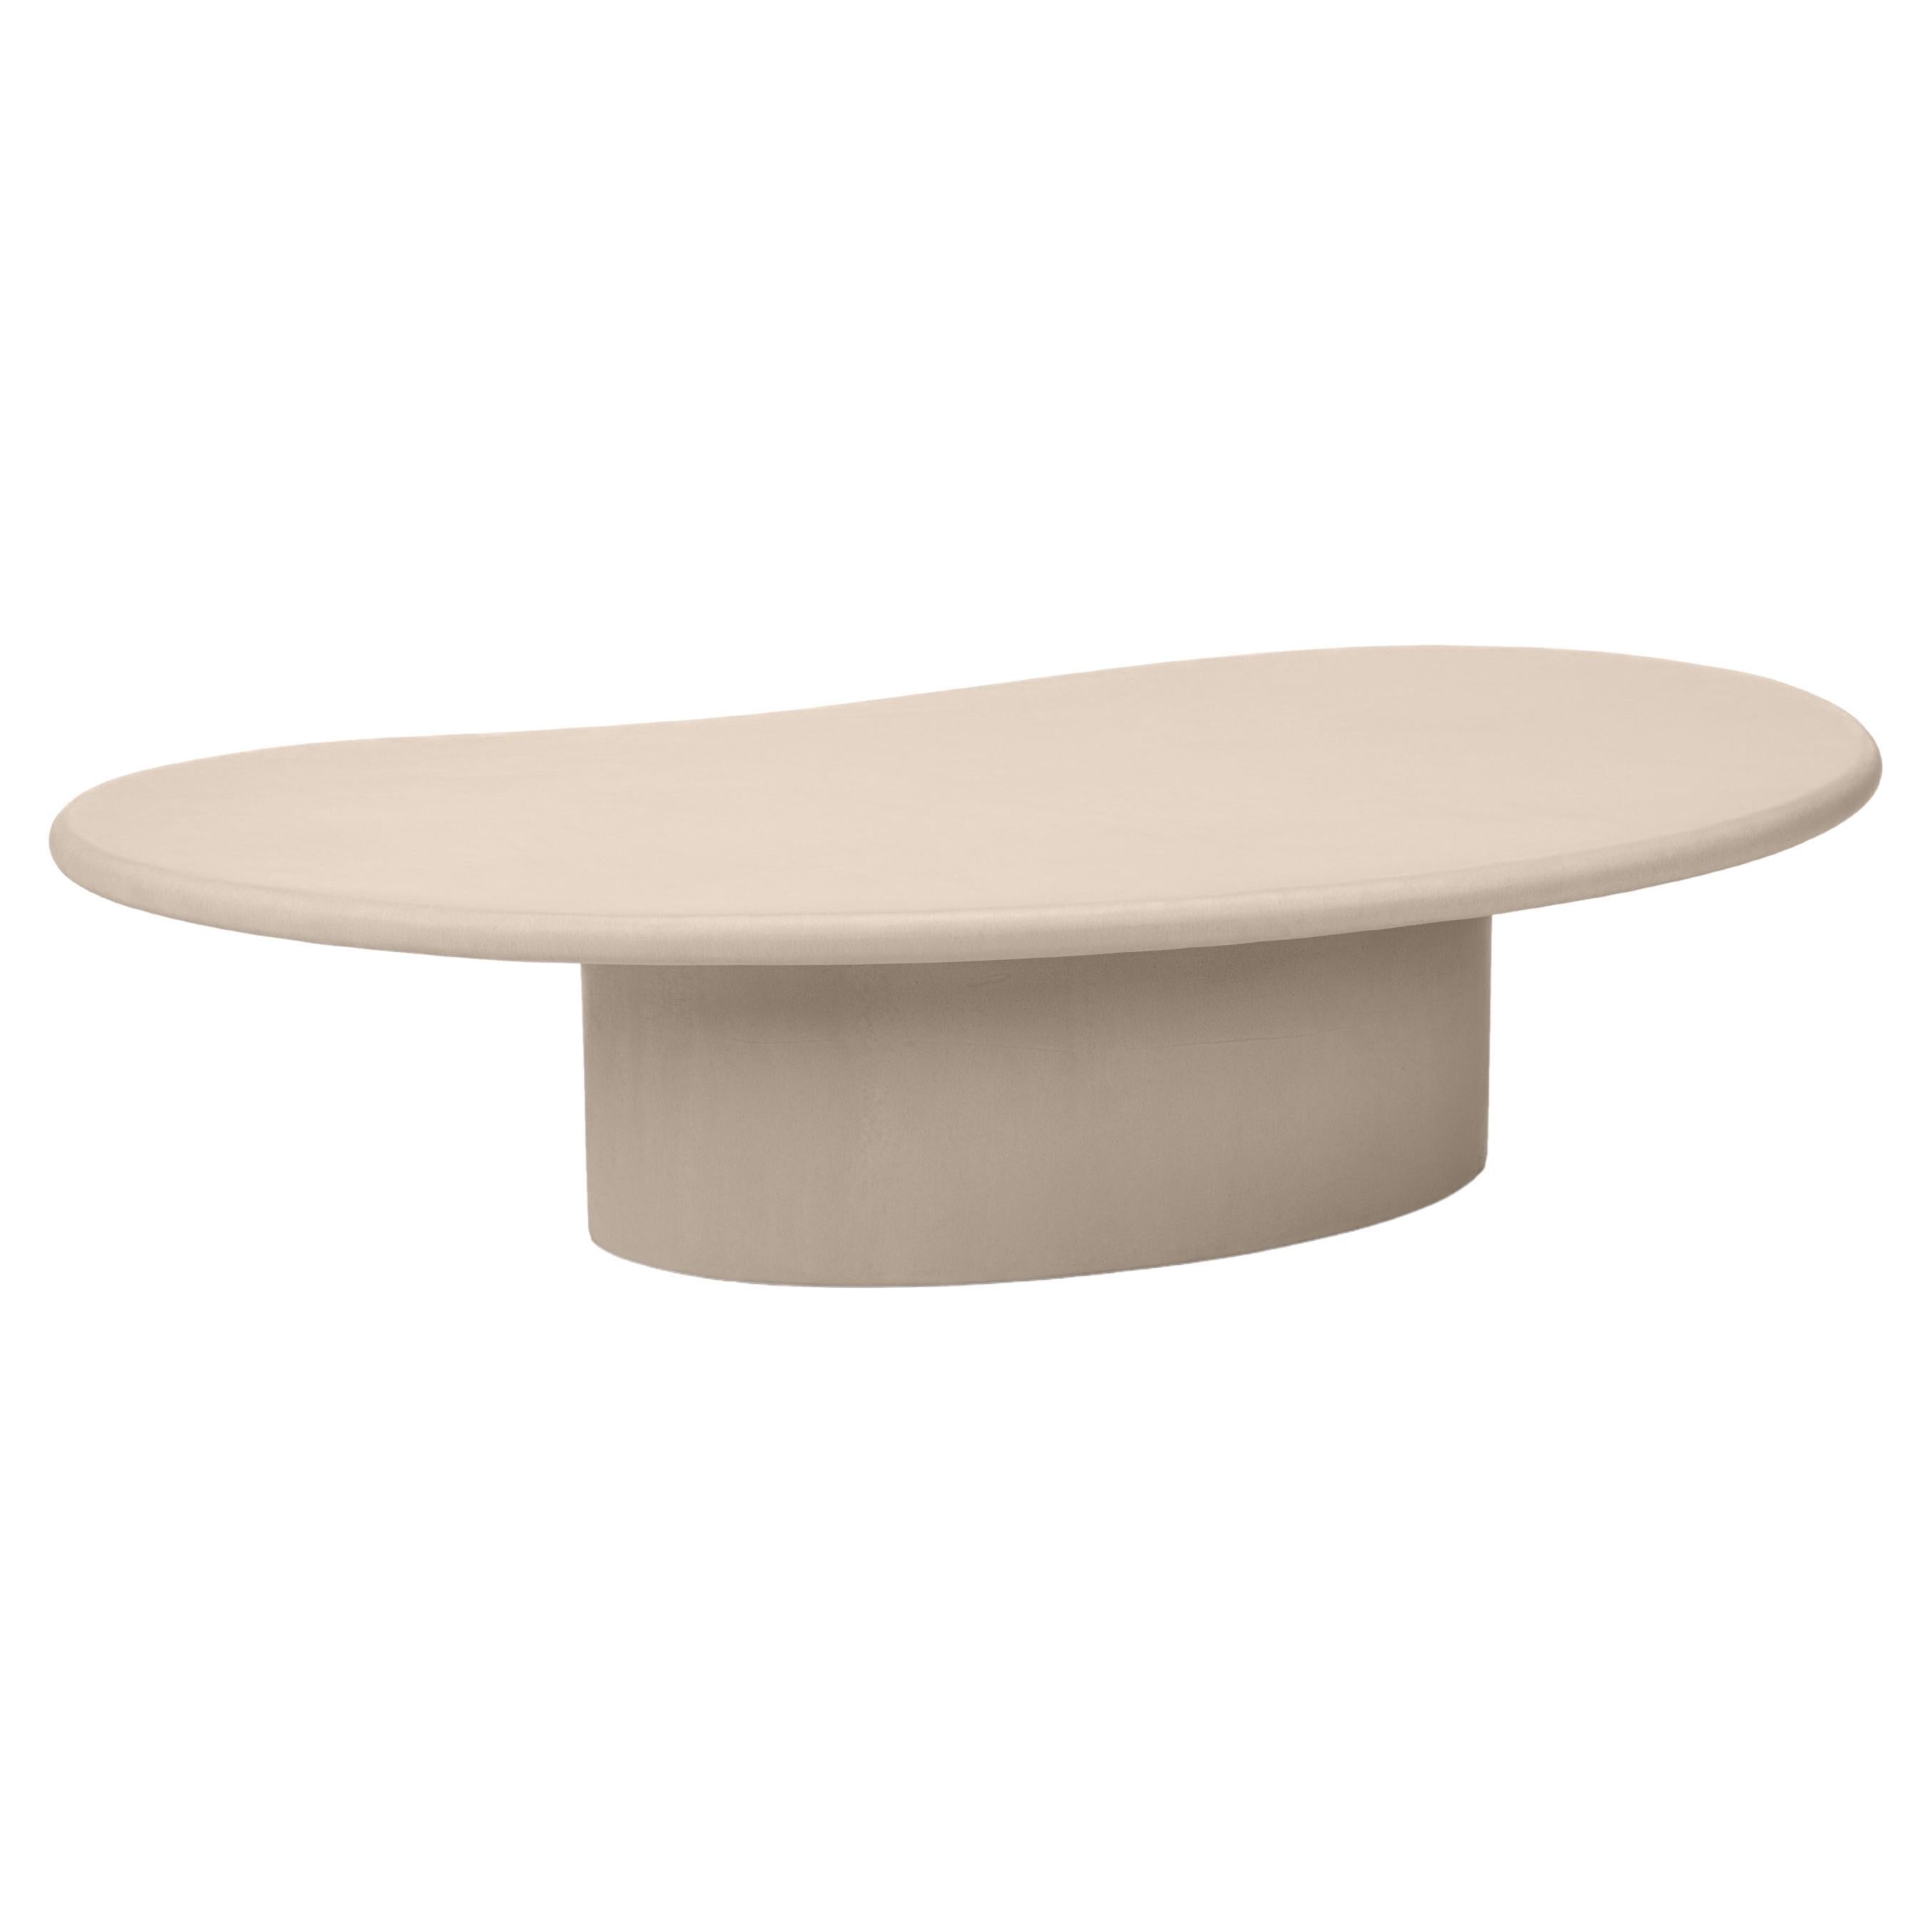 Organic Shaped Natural Plaster Coffee Table "Angus" 150 by Isabelle Beaumont For Sale